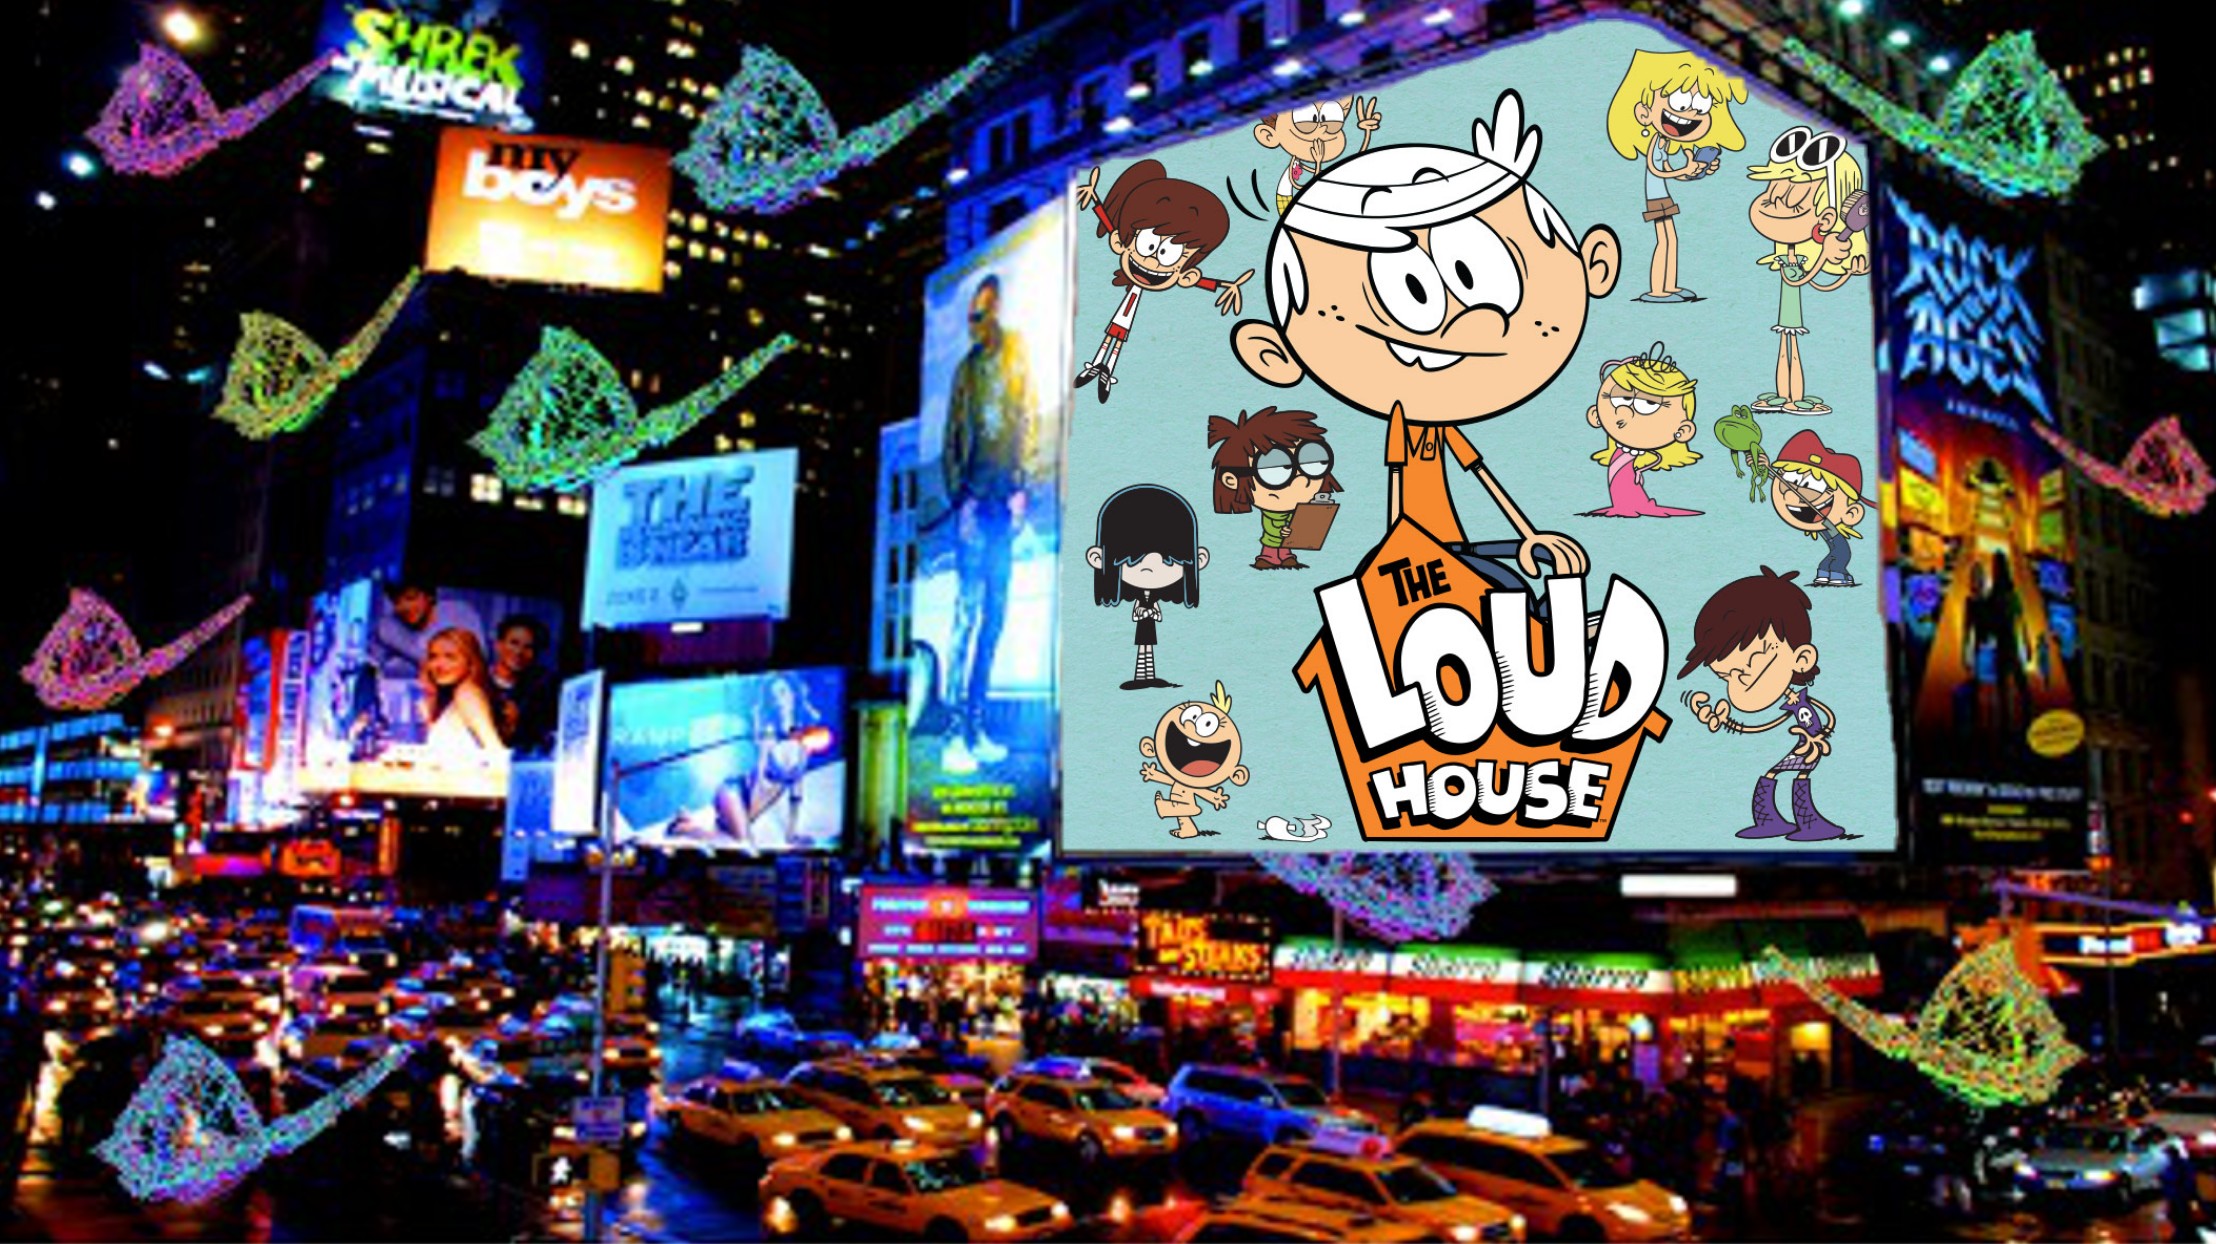 A Building Showing The Loud House (Resubmitted) by